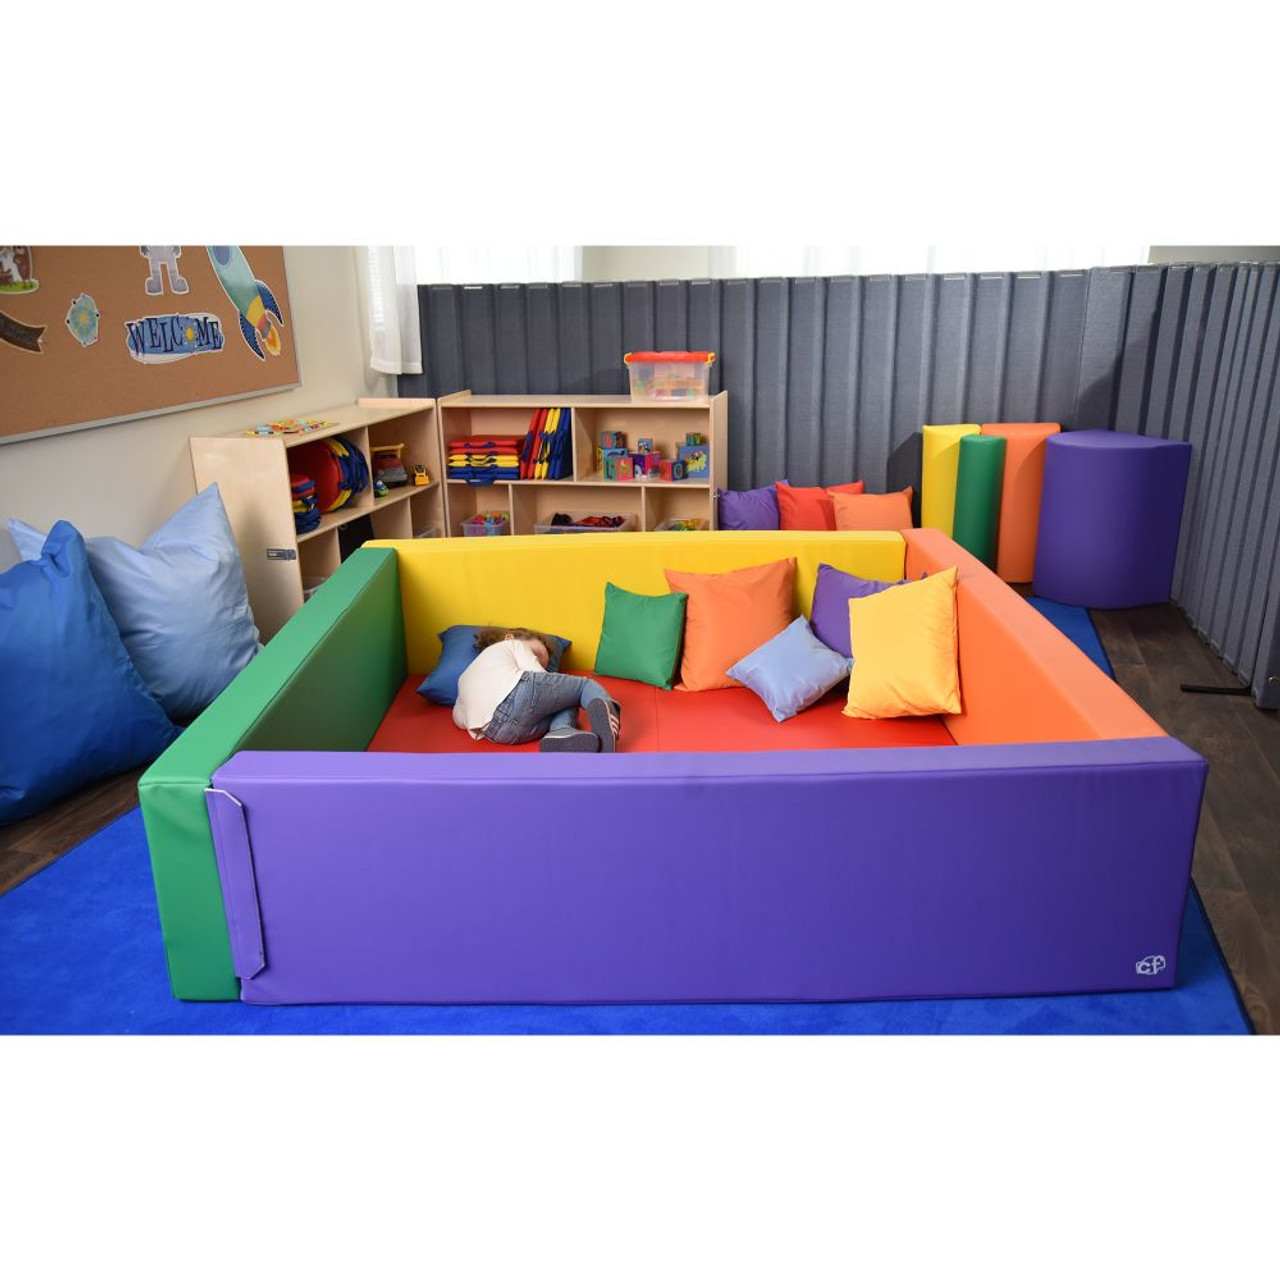 Lollipop Play Yard - in use  - pillows not included